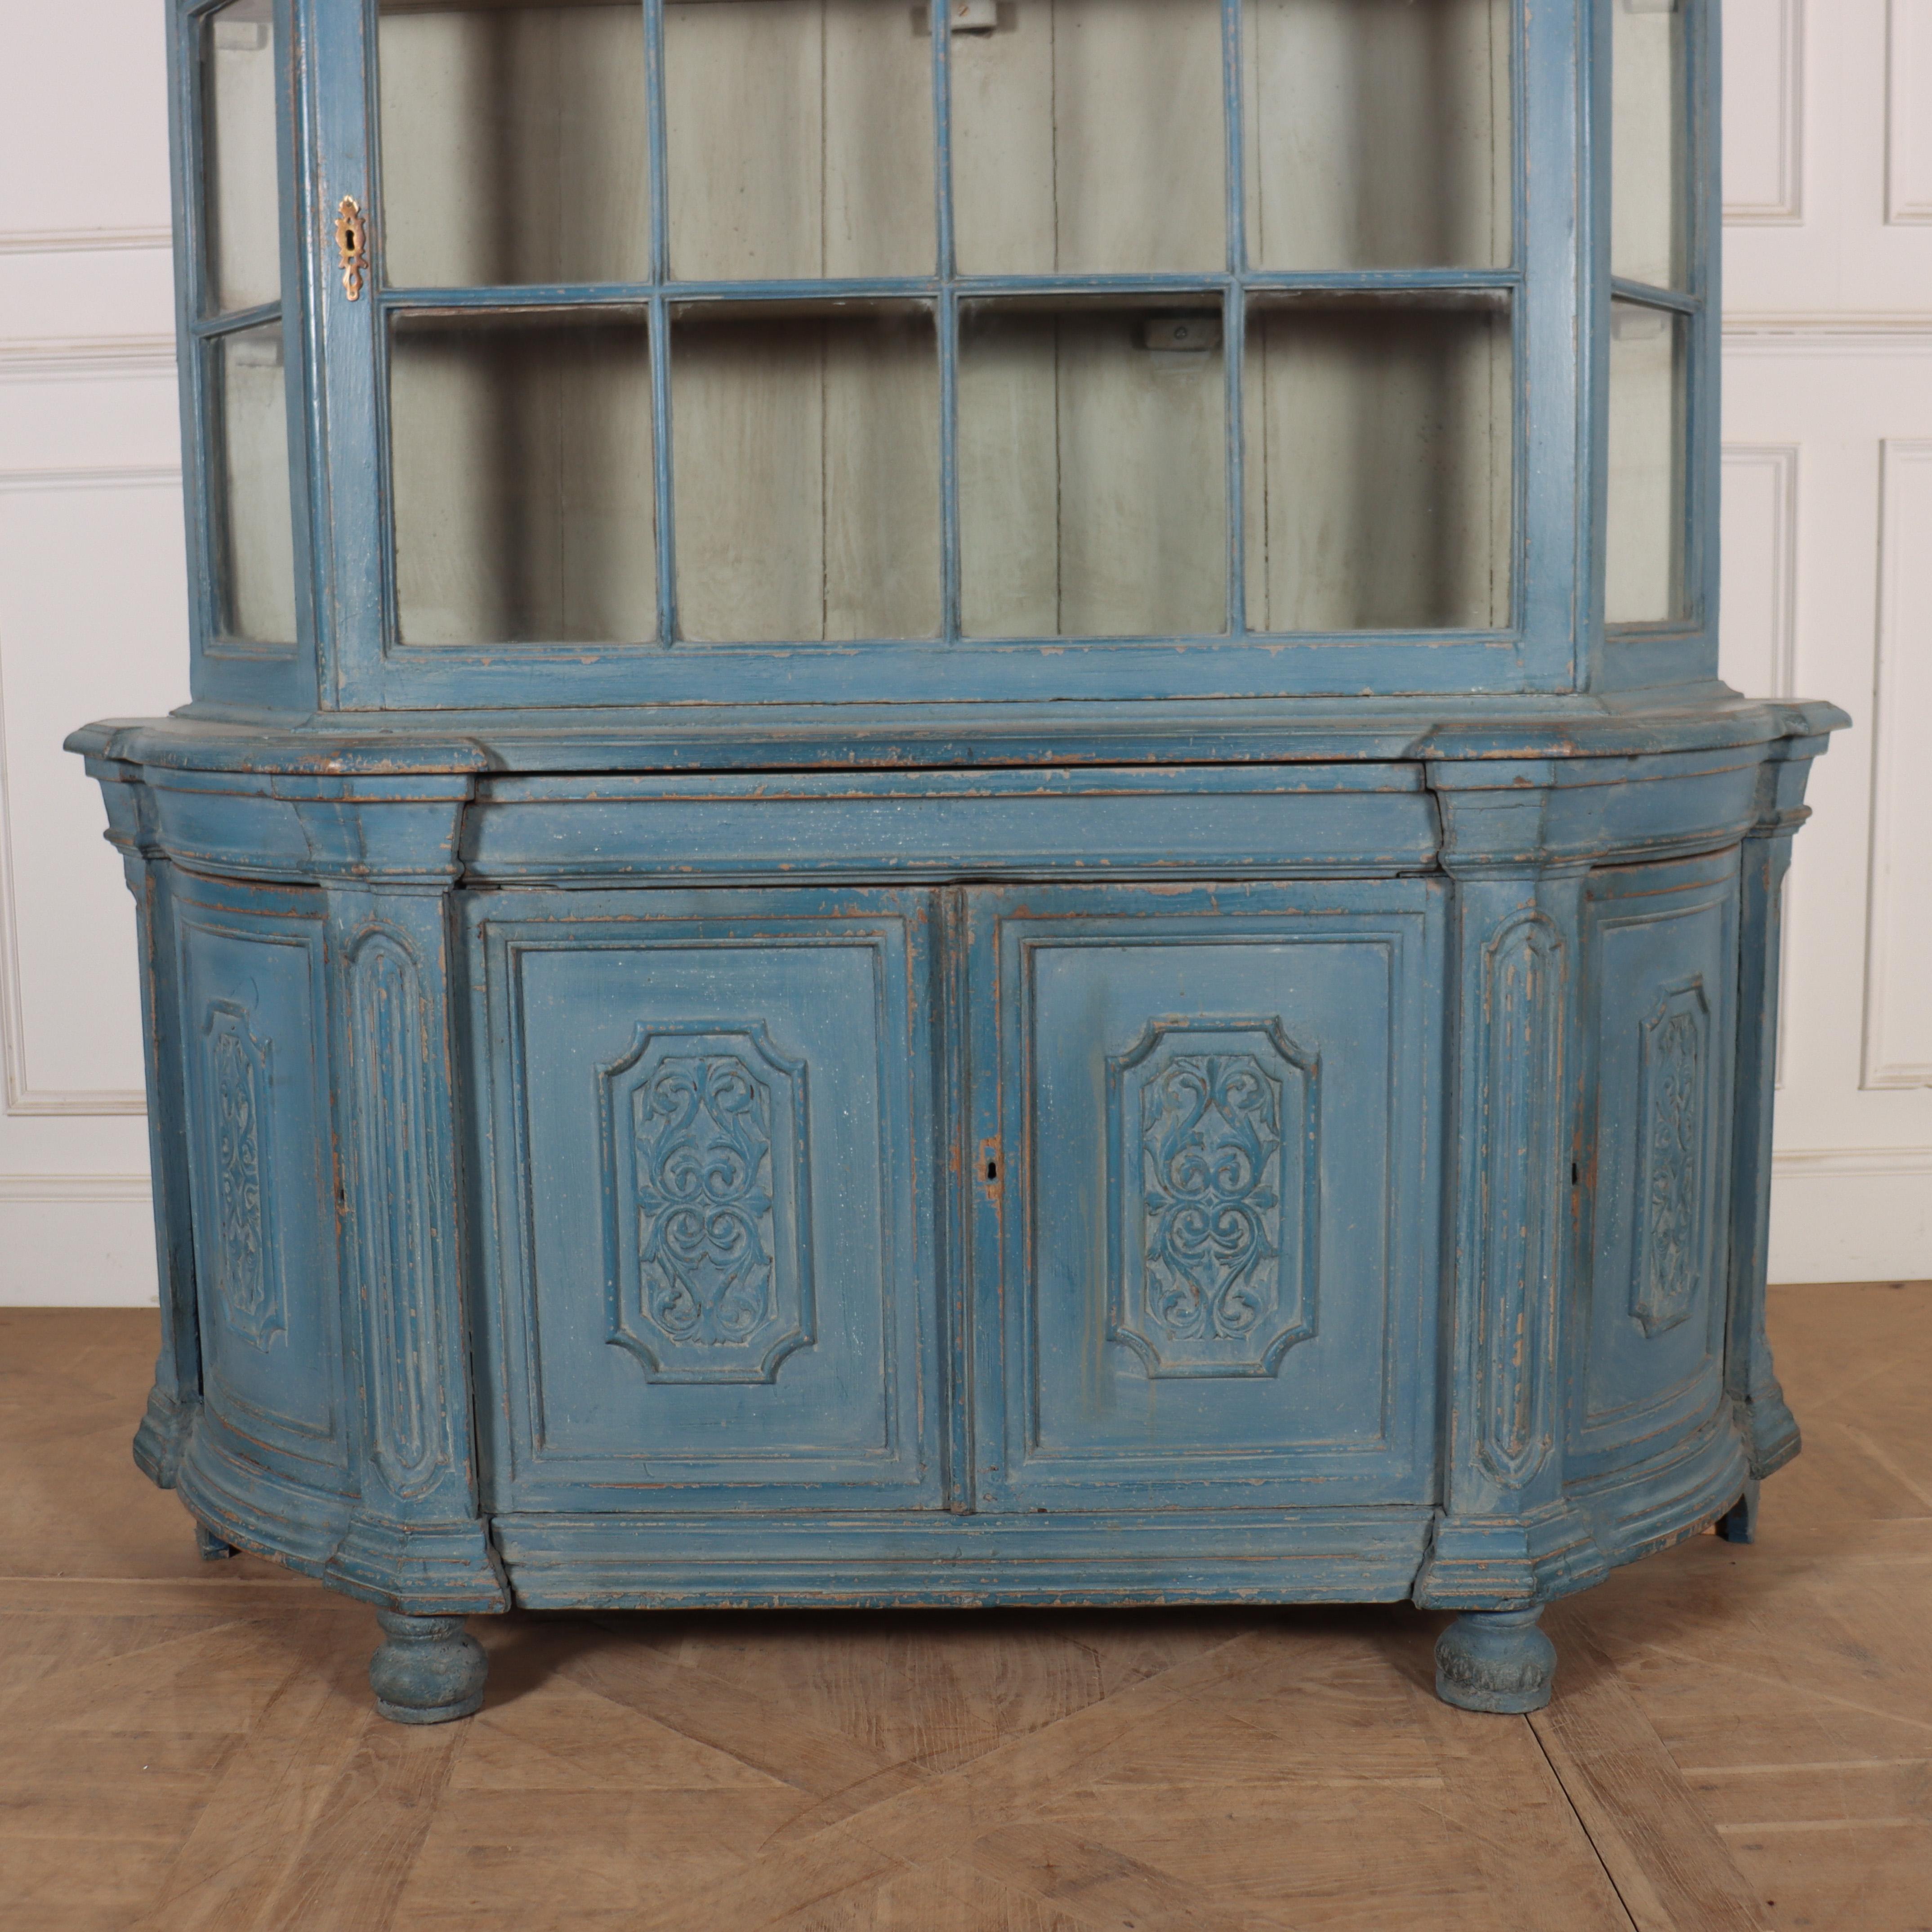 Wonderful 18th century Dutch painted oak display cabinet with two hidden drawers. 1770.

Reference: 7885

Dimensions
61.5 inches (156 cms) Wide
16.5 inches (42 cms) Deep
81 inches (206 cms) High